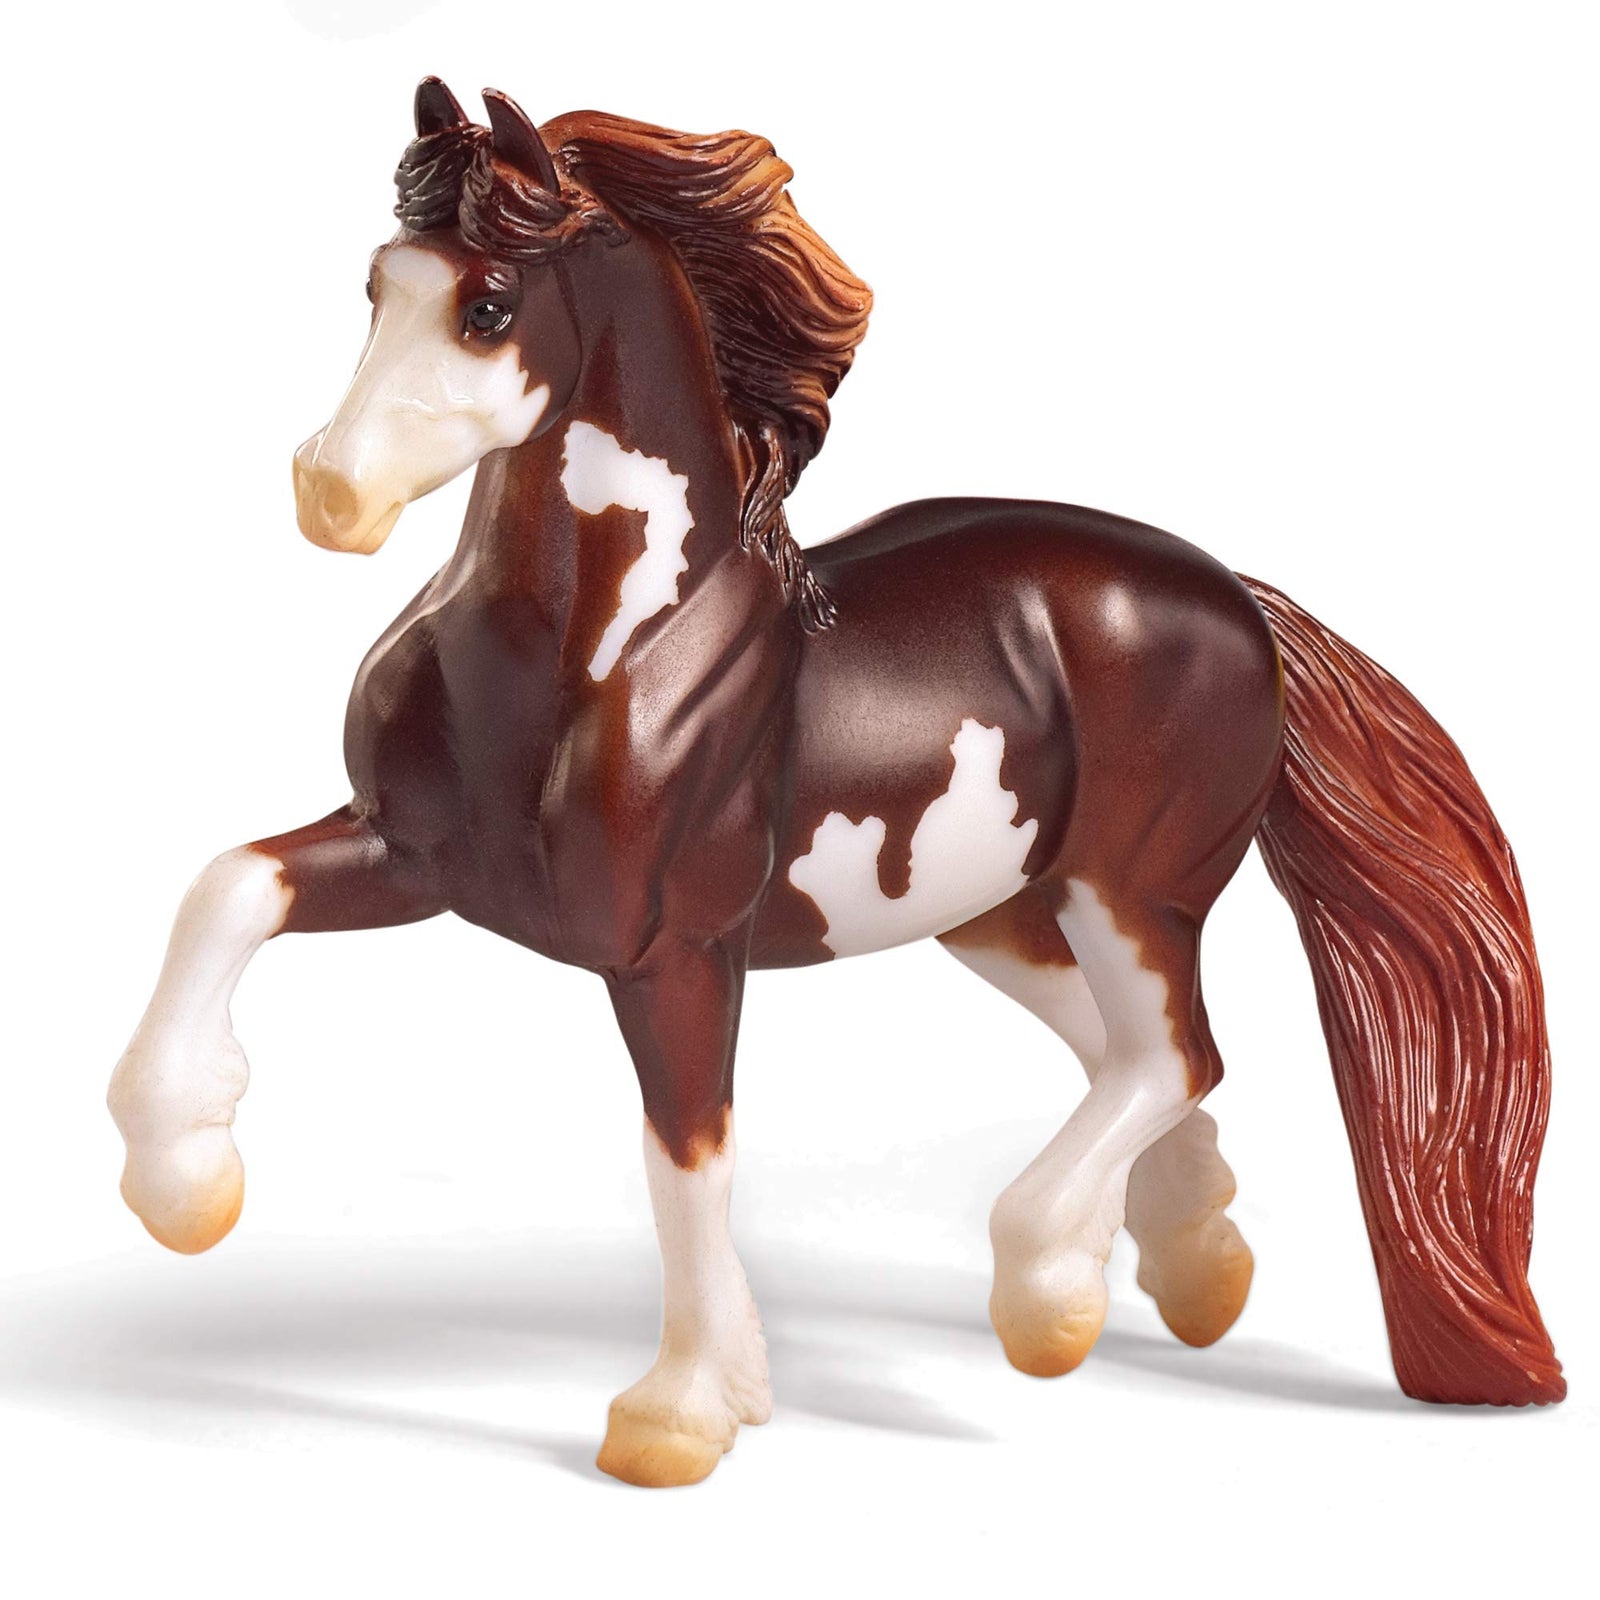 Breyer Stablemates Red Stable and Horse Set | 12 Piece Play set with 2 Horses | 11.5"L x 7.5"W x 9.25"H | 1:32 Scale | Model #59197